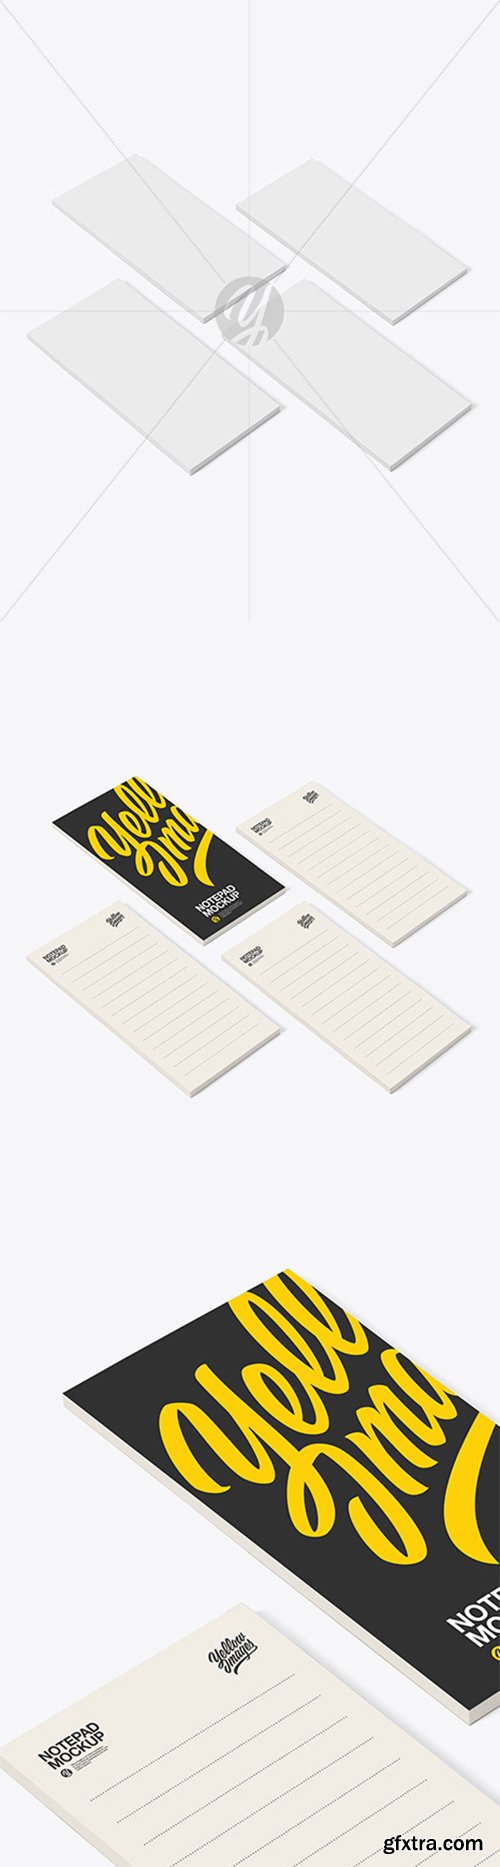 Four Paper Pads Mockup 55759